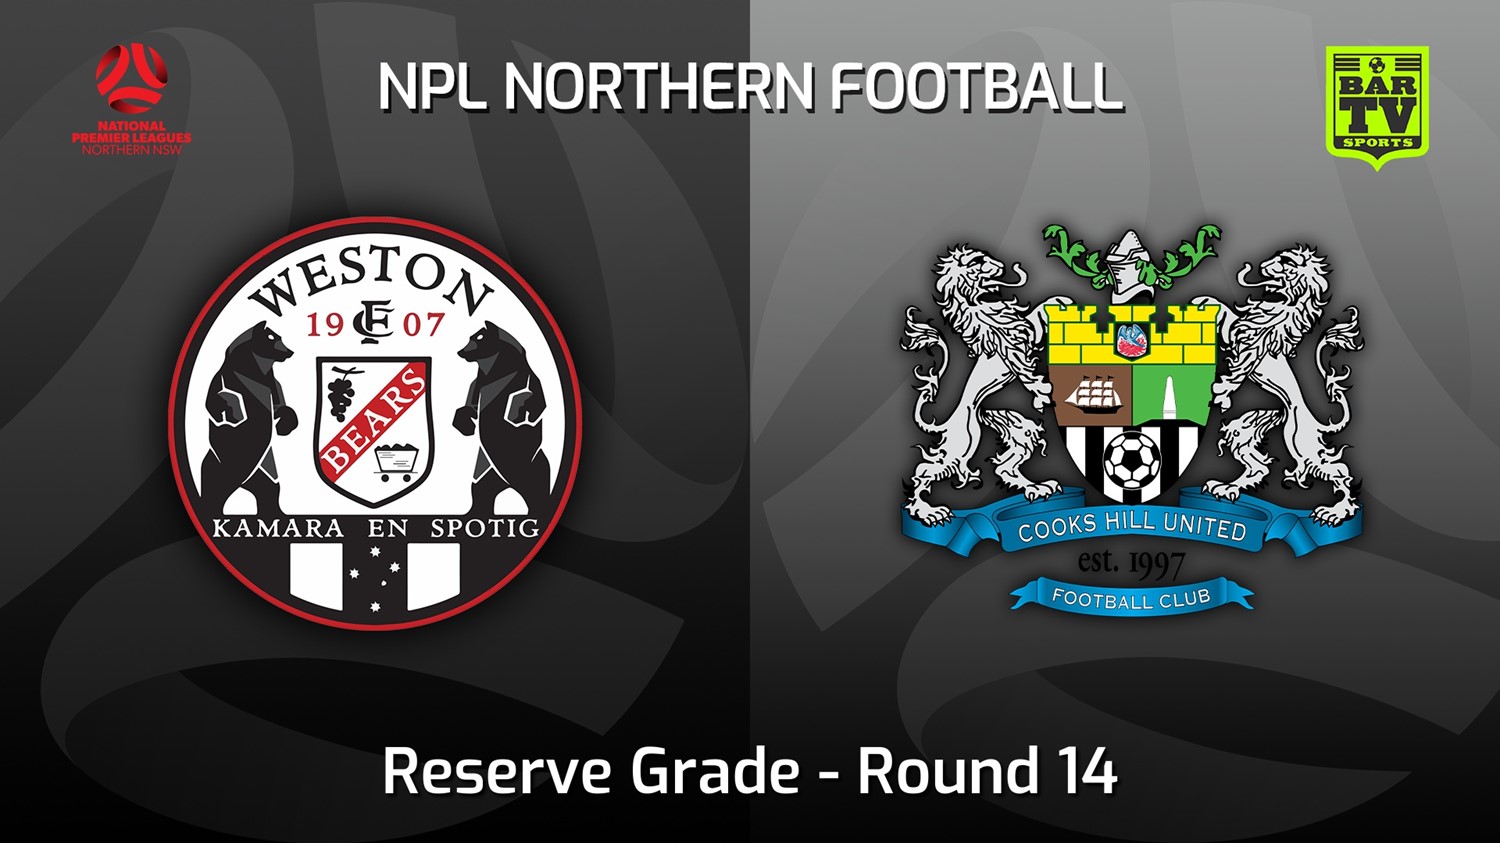 220612-NNSW NPLM Res Round 14 - Weston Workers FC Res v Cooks Hill United FC (Res) Minigame Slate Image